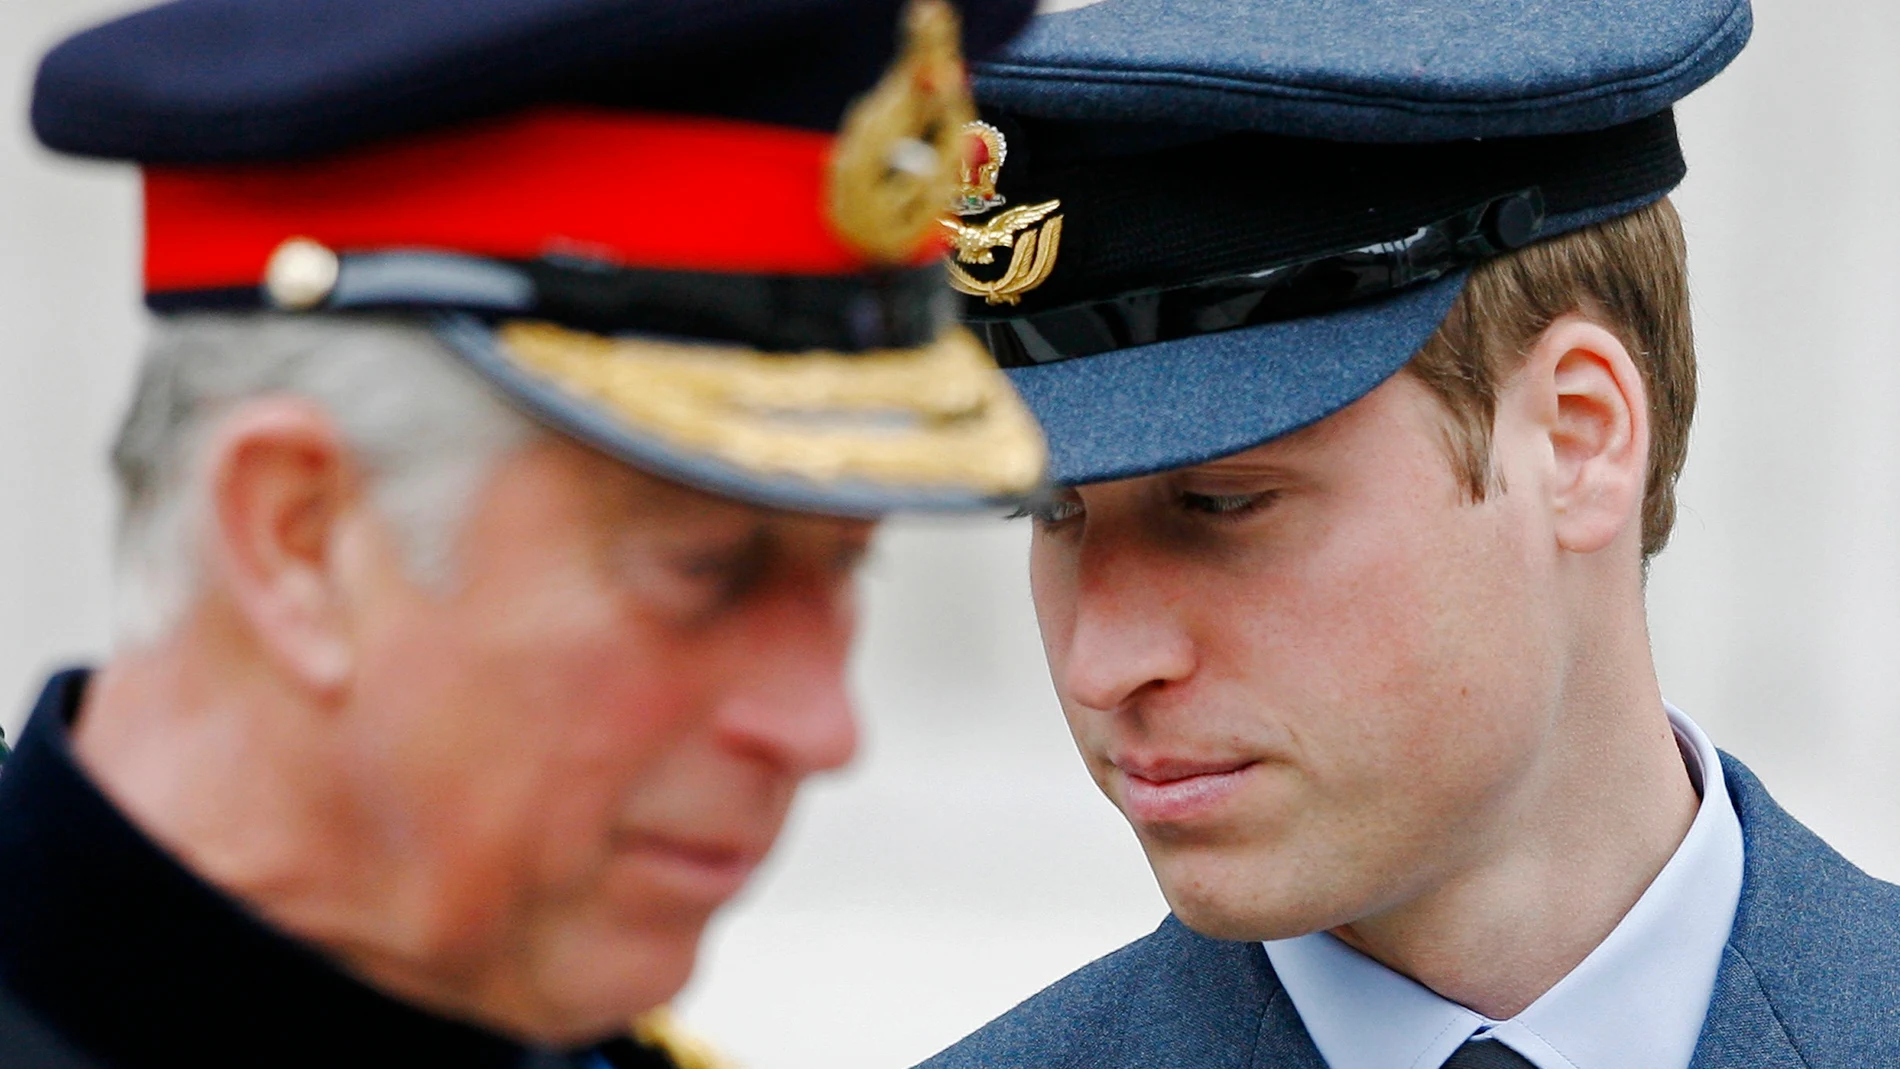 Britain's Princes Charles and his son Prince William leave after attending a Service of Commemoration to mark the end of combat operations in Iraq, at St Paul's Cathedral in London